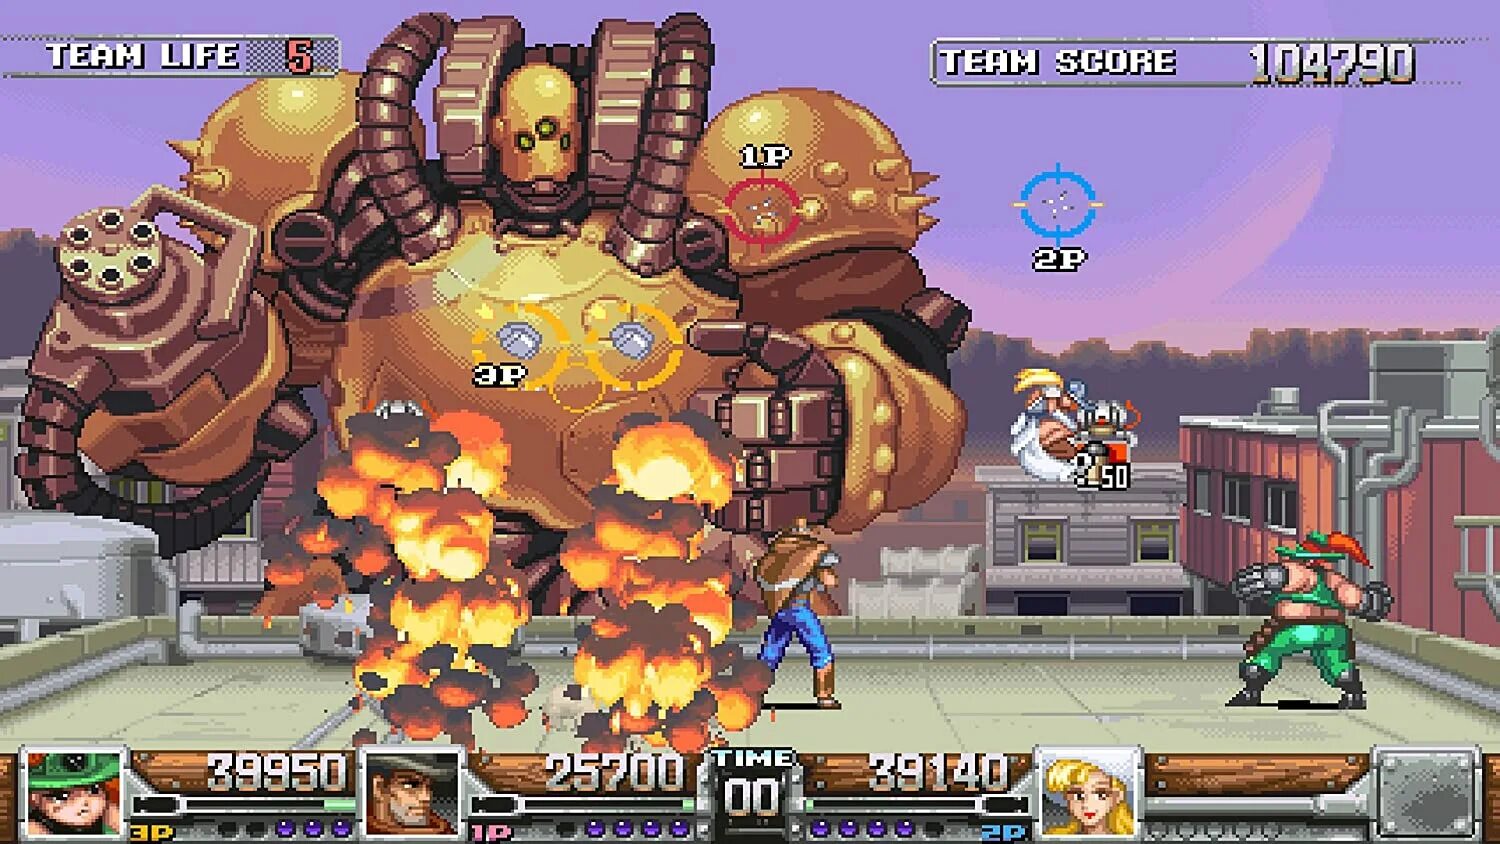 Ps4 дикая. Wild Guns Reloaded ps4. Wild Guns 1994. Wild Guns Snes. Wild Guns Reloaded (Switch).